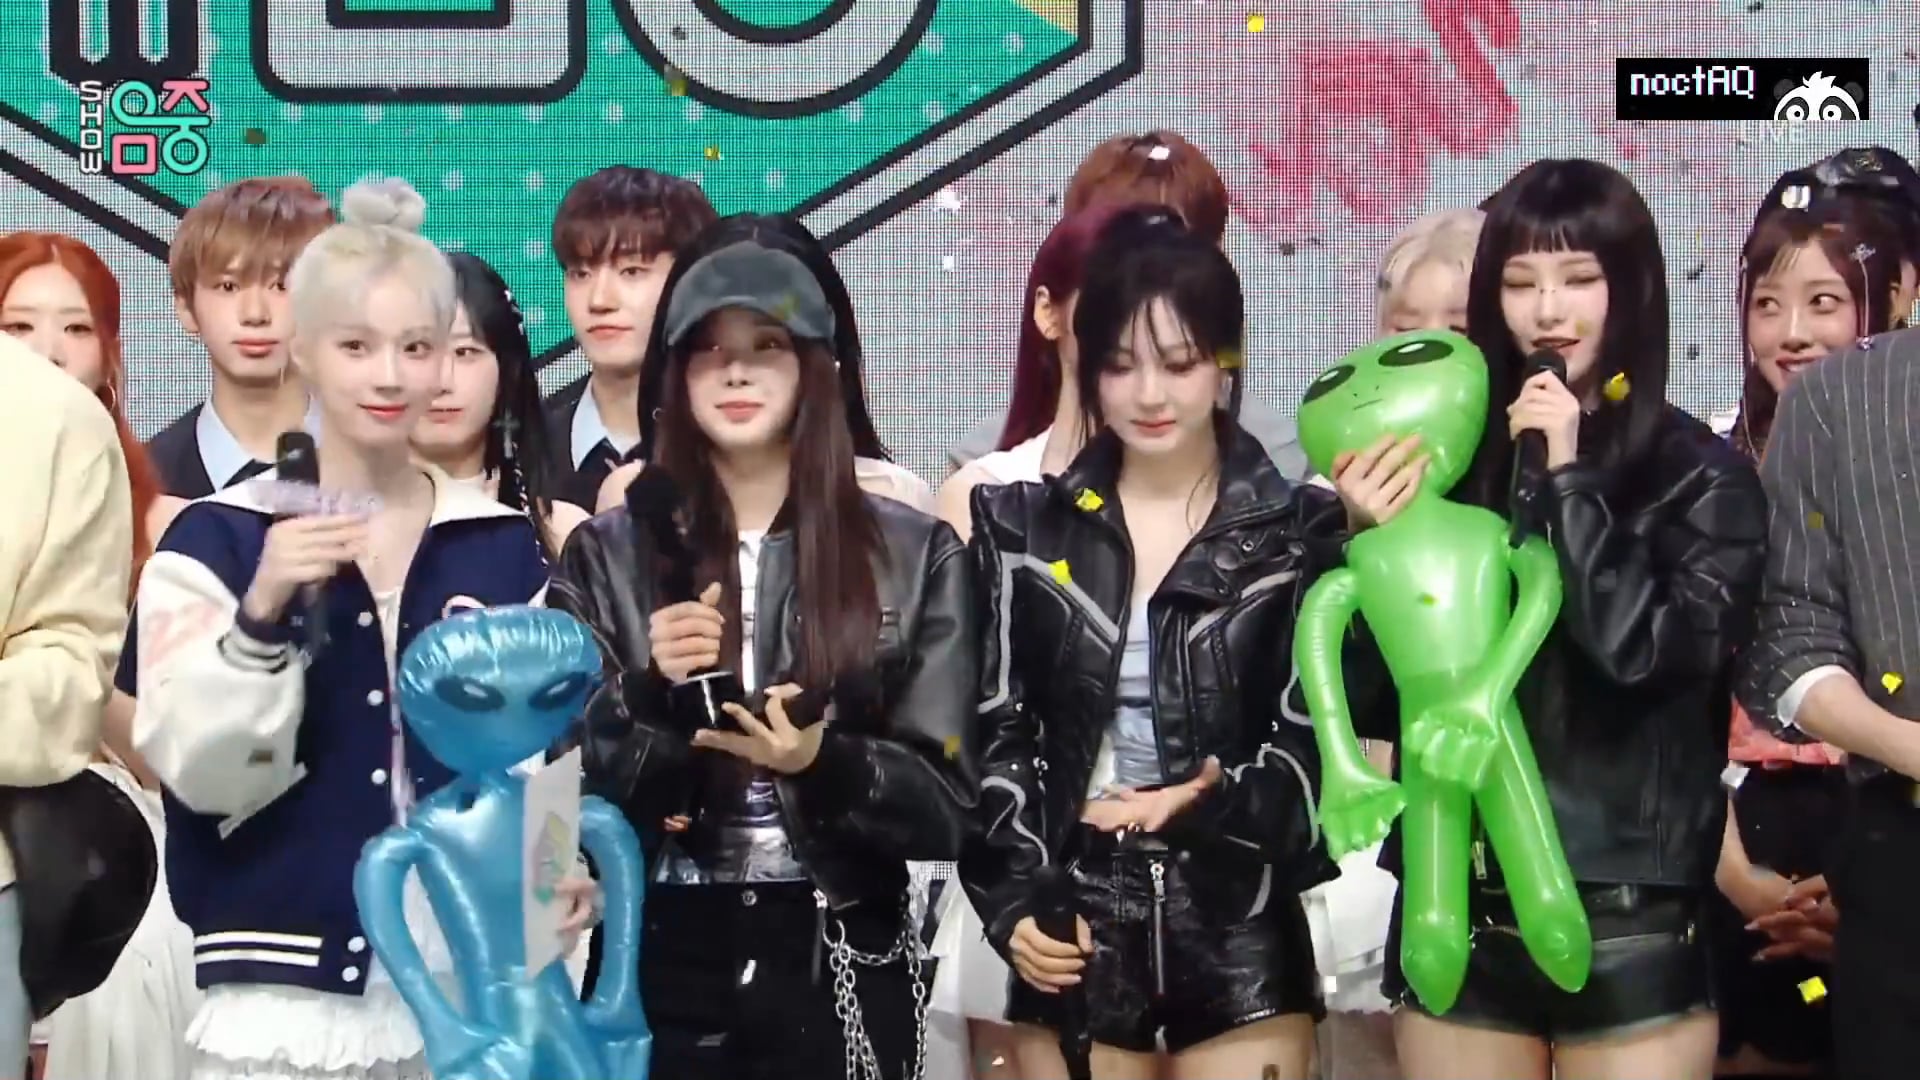 240601 aespa earns their fifth win for ‘Supernova’ on Show! Music Core